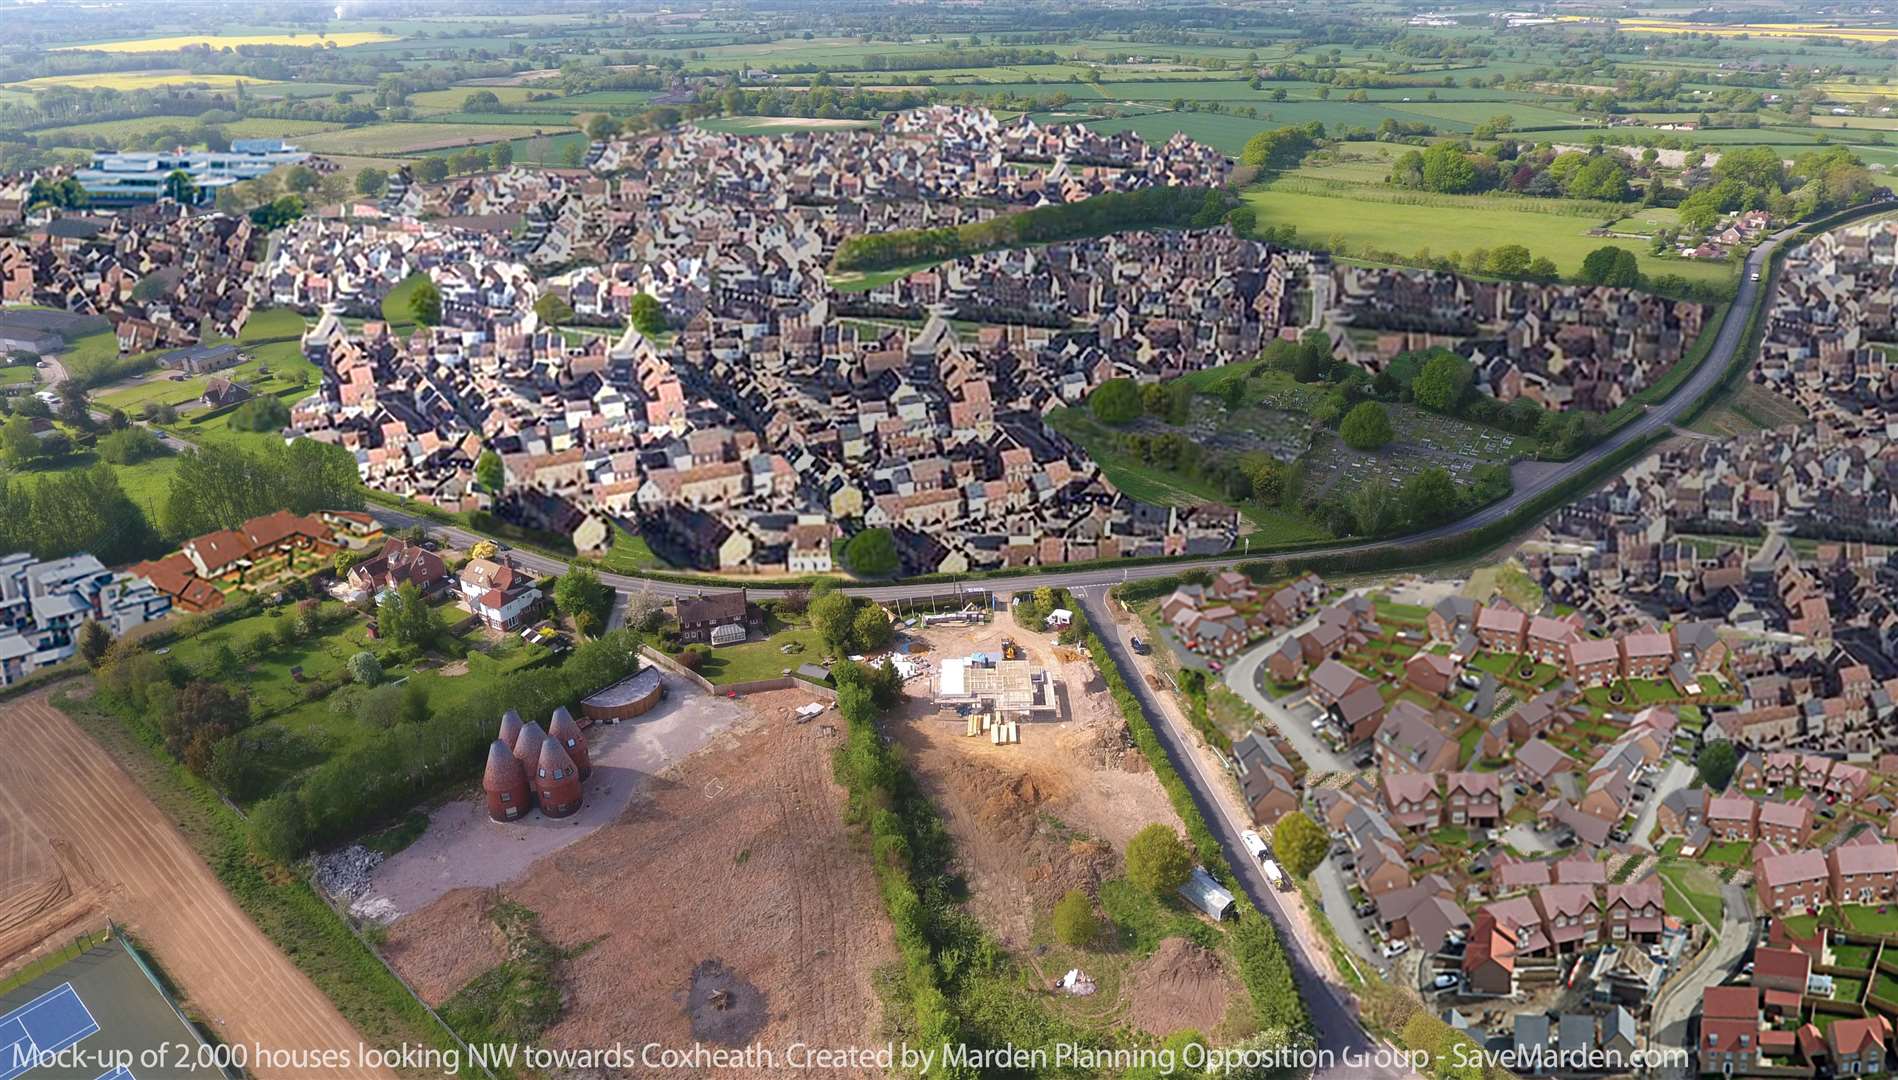 How the village of Marden could look once the proposed garden community is built